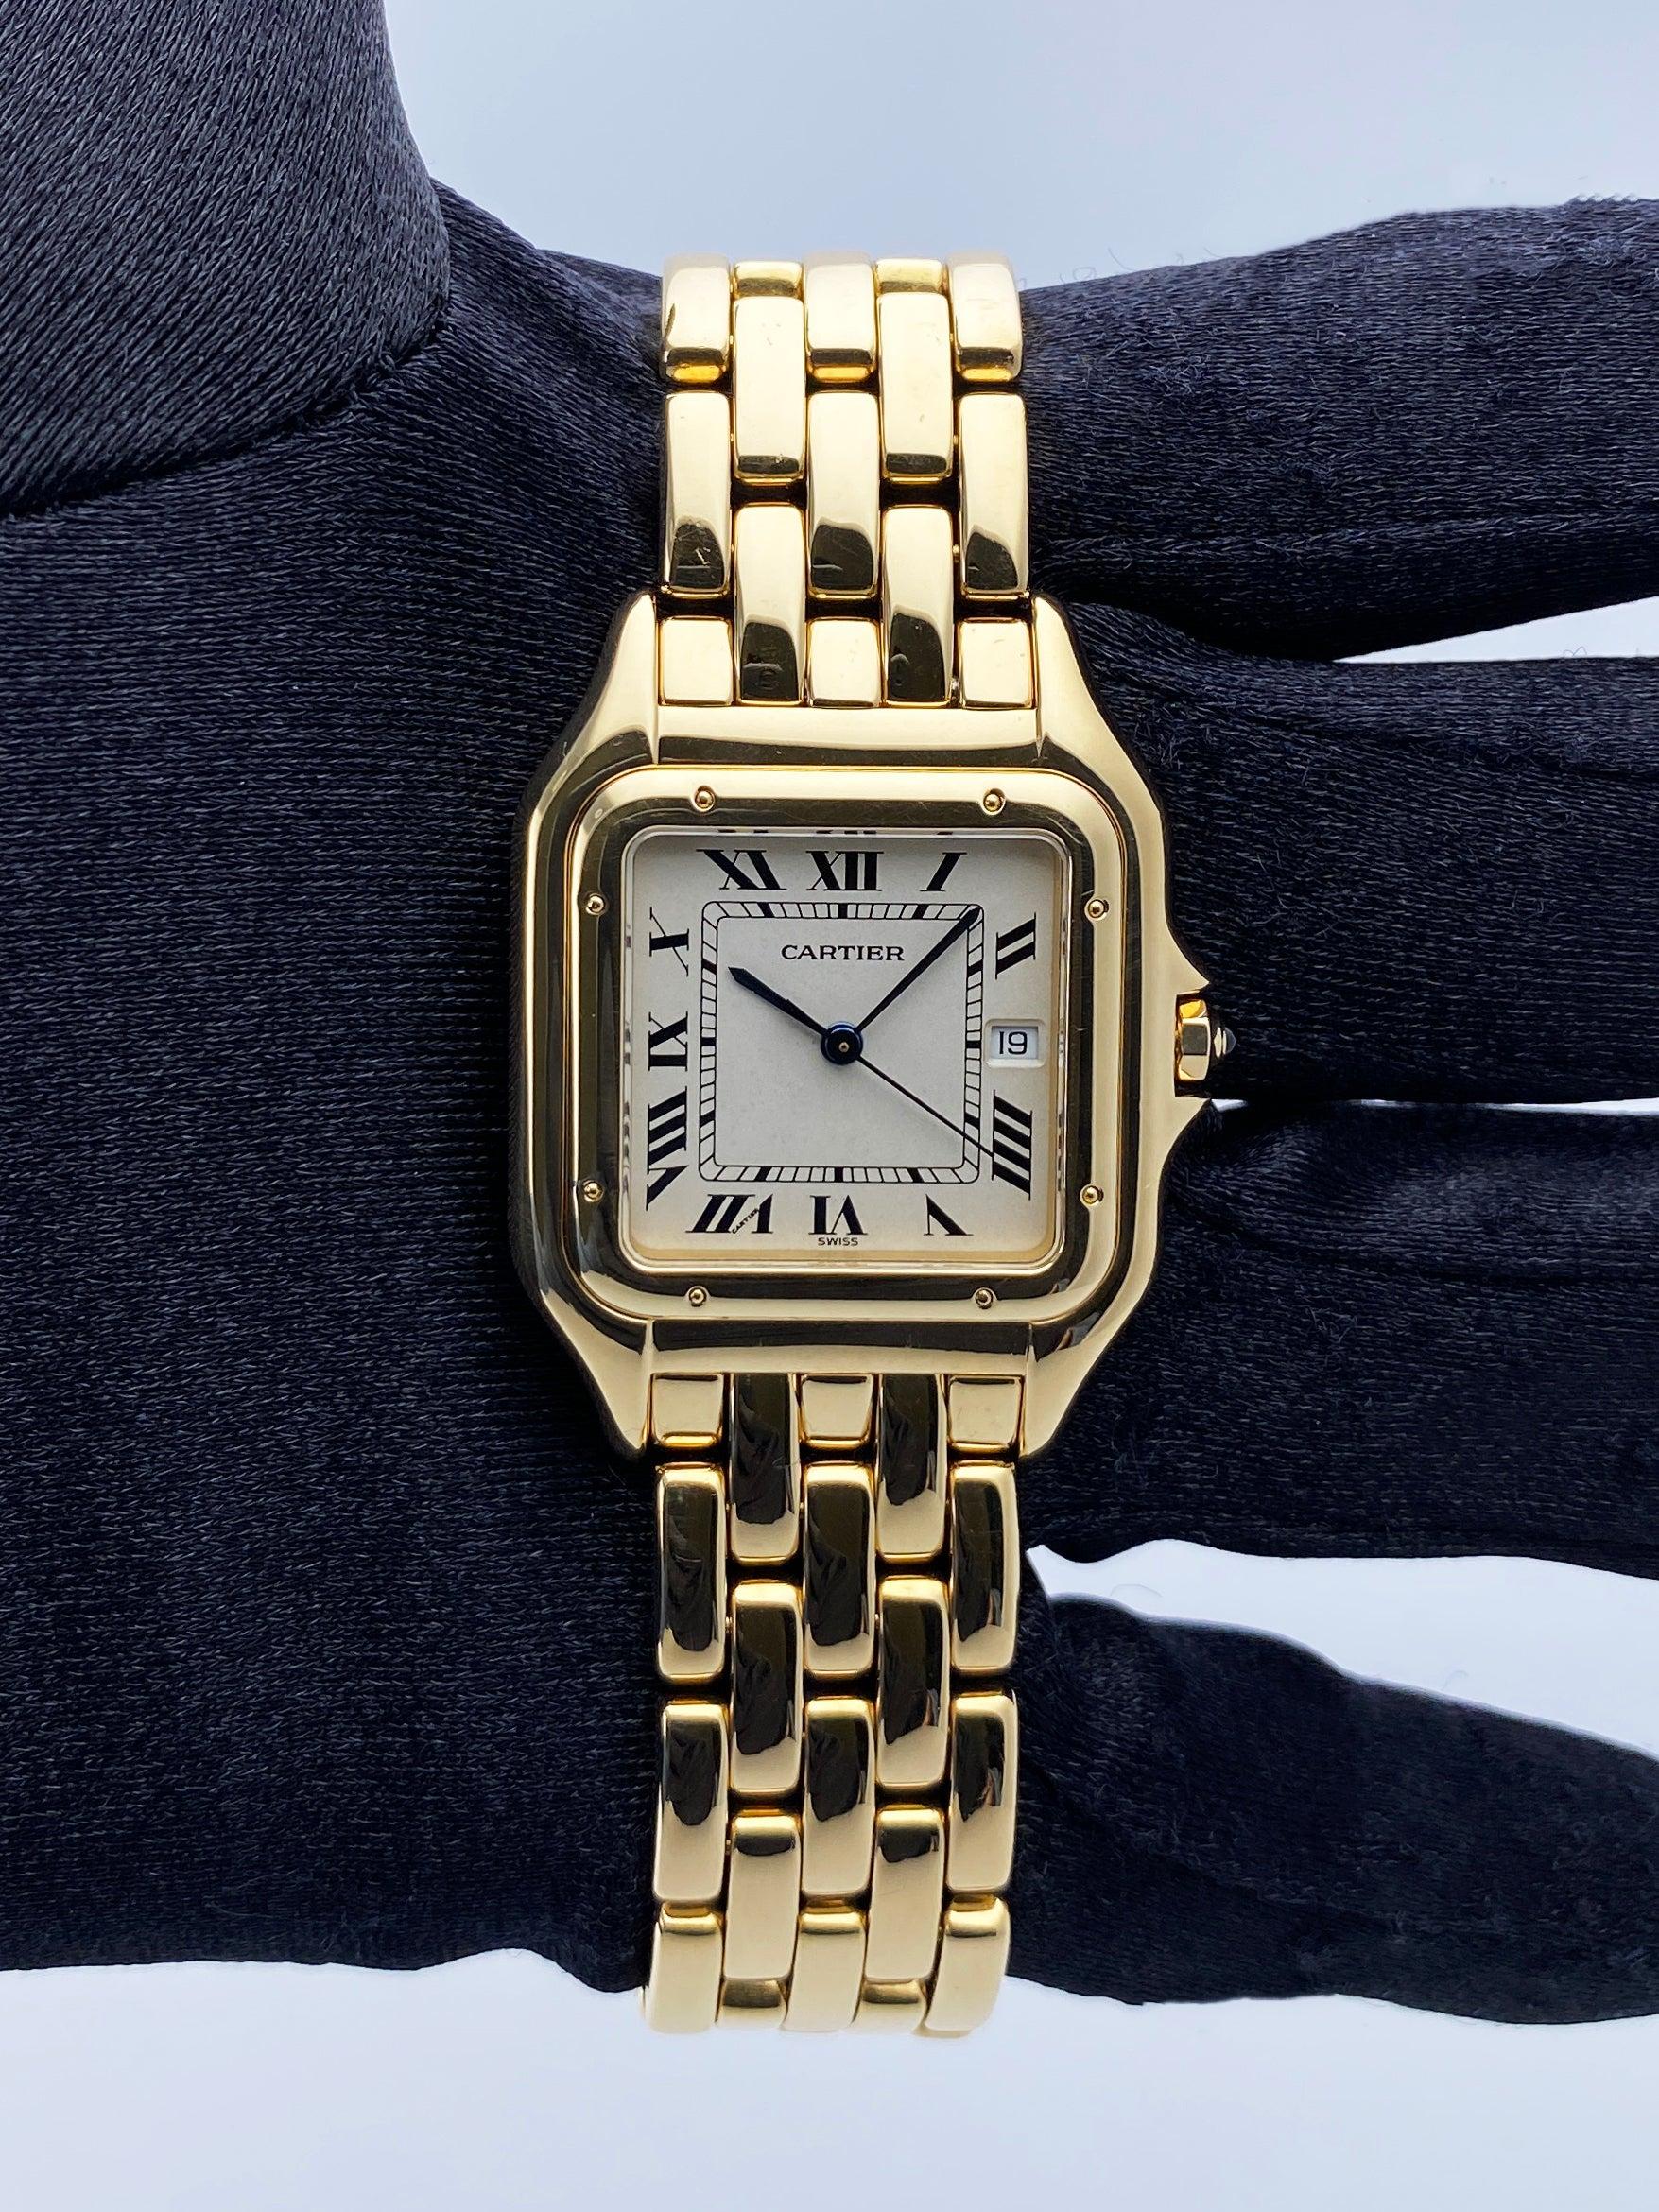 Cartier Panthere Jumbo Mens Watch. 31mm 18K yellow gold case with 18K yellow gold smooth bezel. Off-White dial with blue steel hands and black Roman numeral hour markers. Minute markers on the inner dial. Date display at the 3 o'clock position. 18k